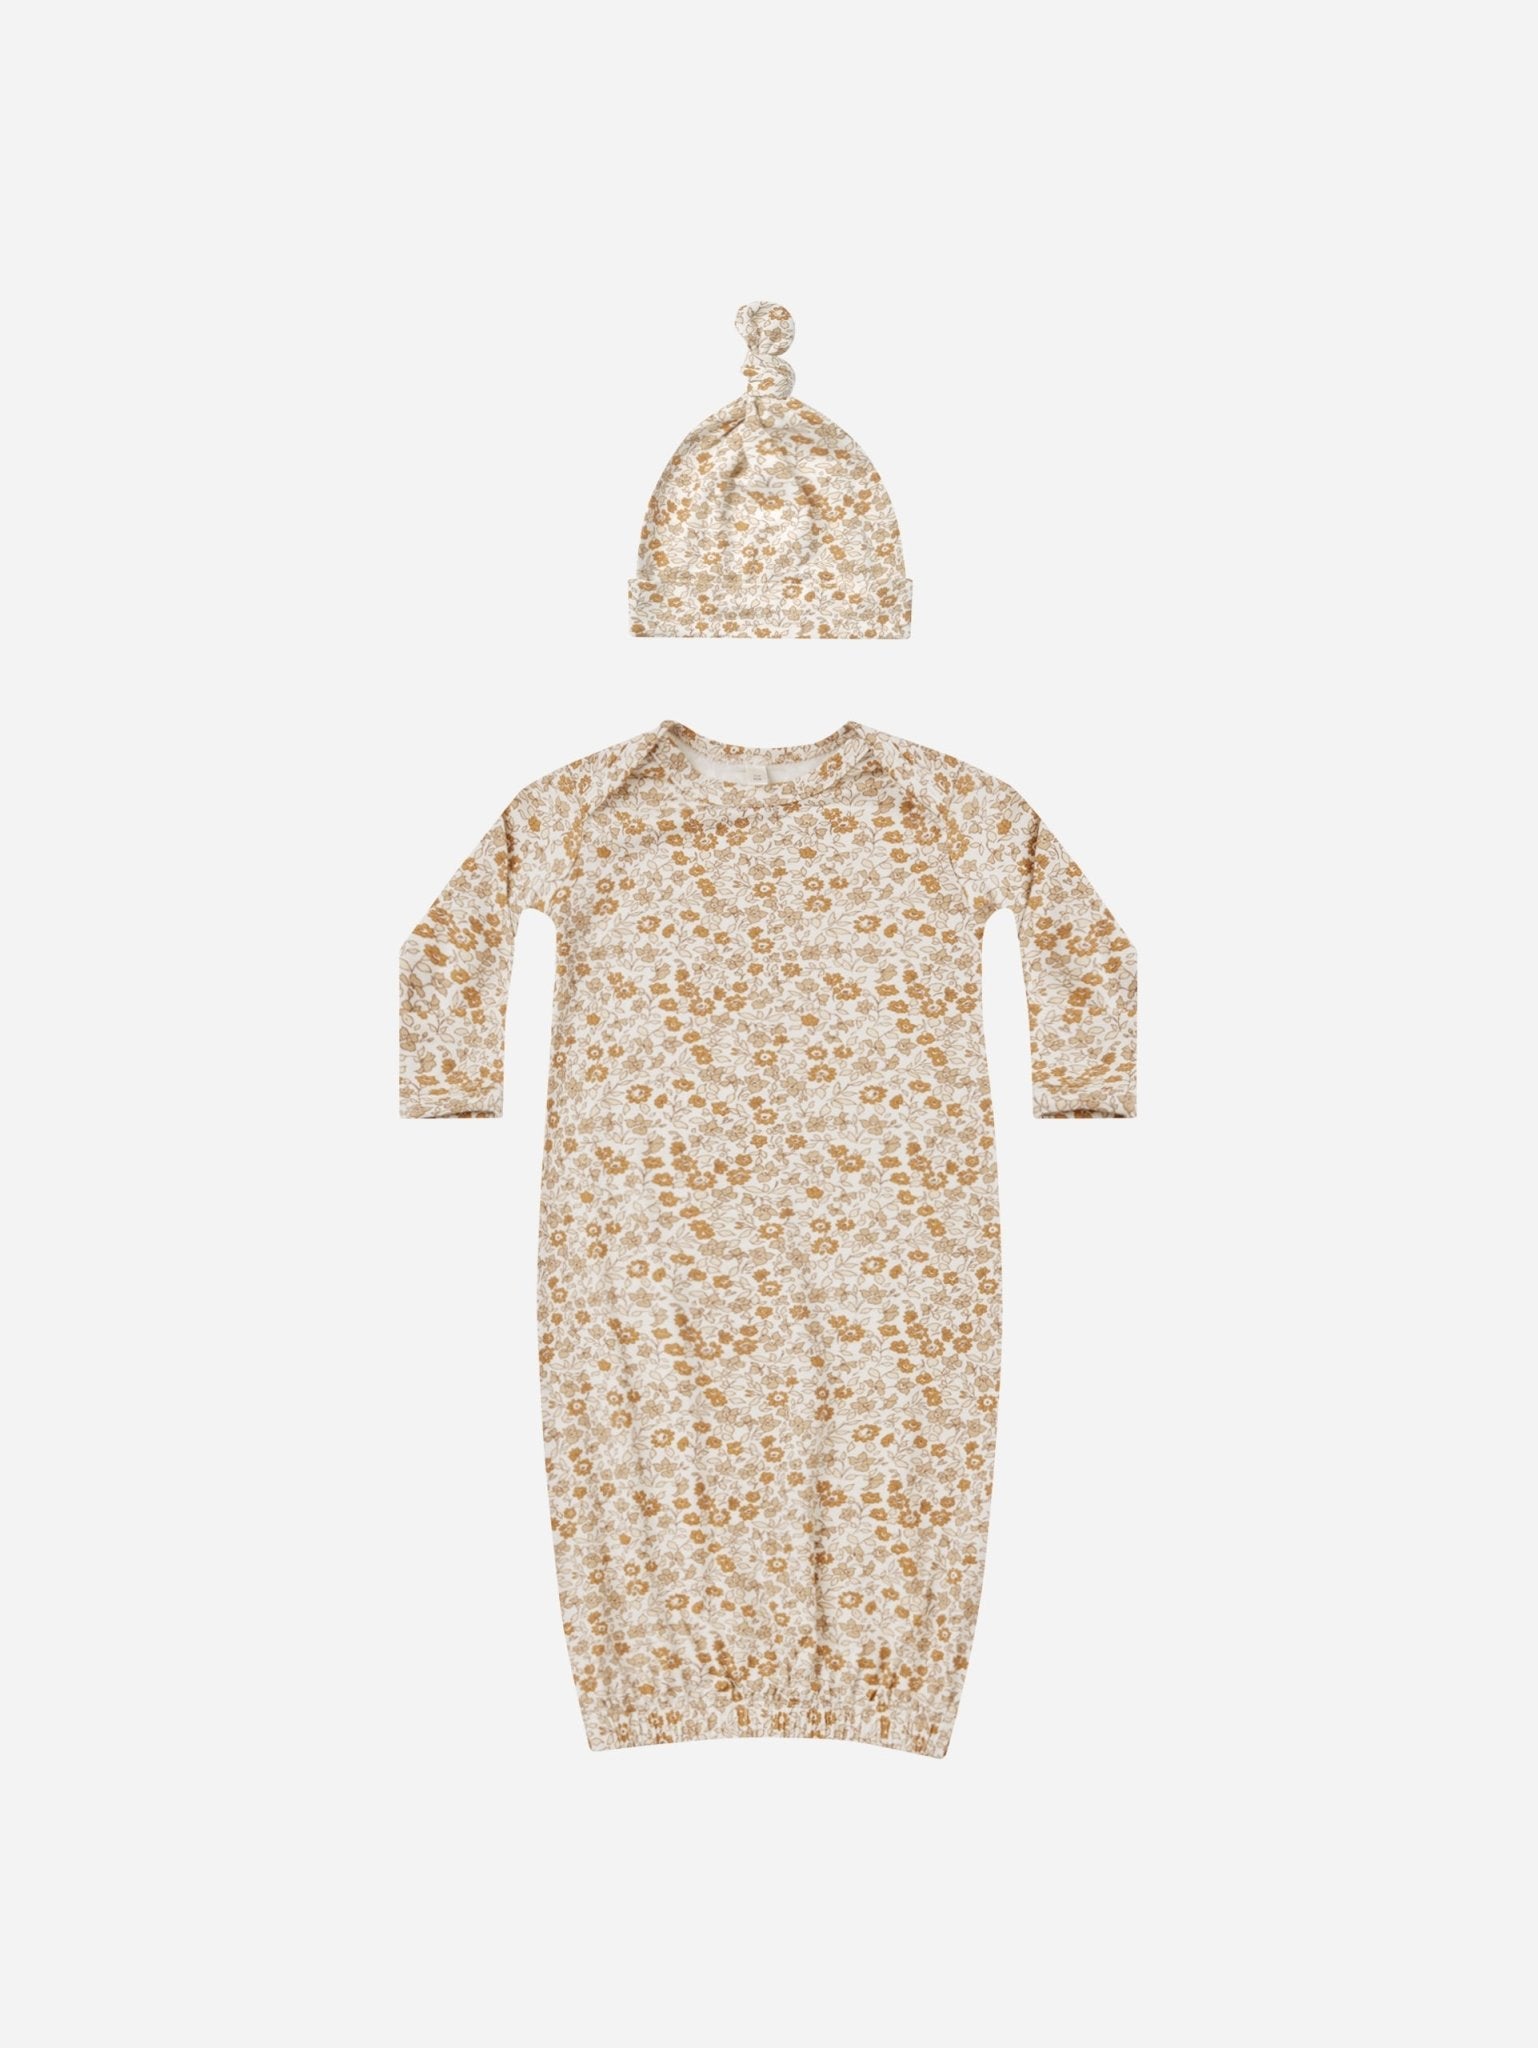 Knotted Baby Gown + Hat Set || Marigold - Rylee + Cru Canada